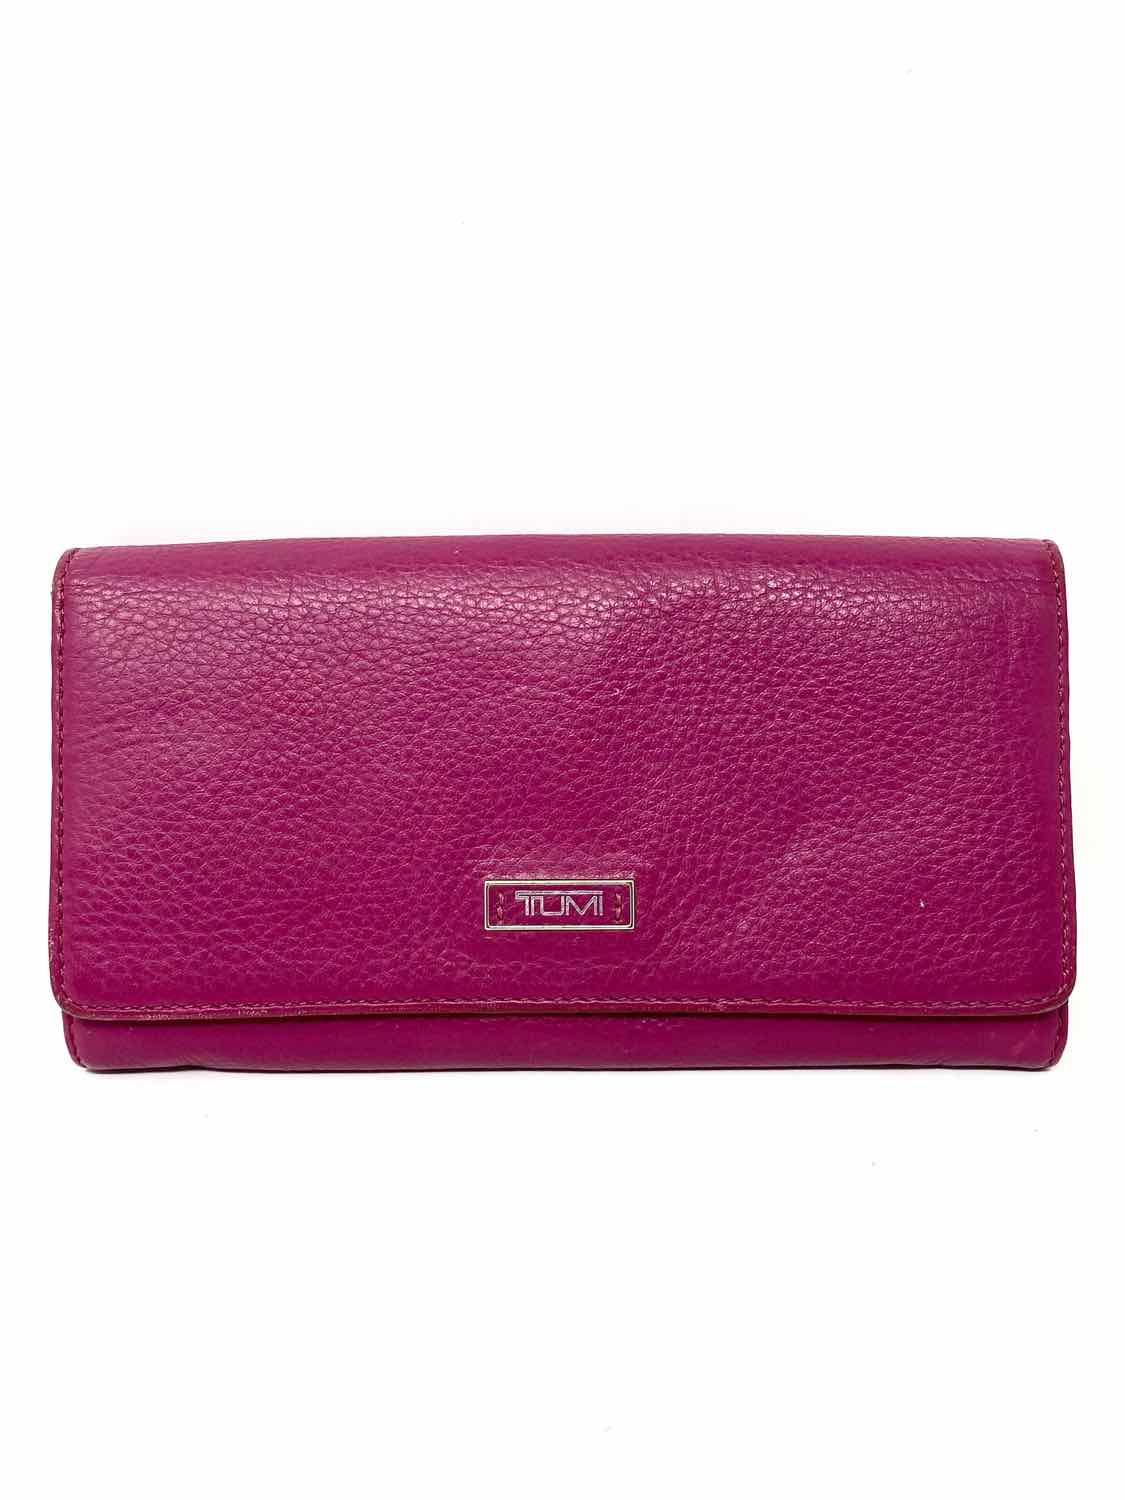 TUMI Wallets & Card Holders — choose from 5 items